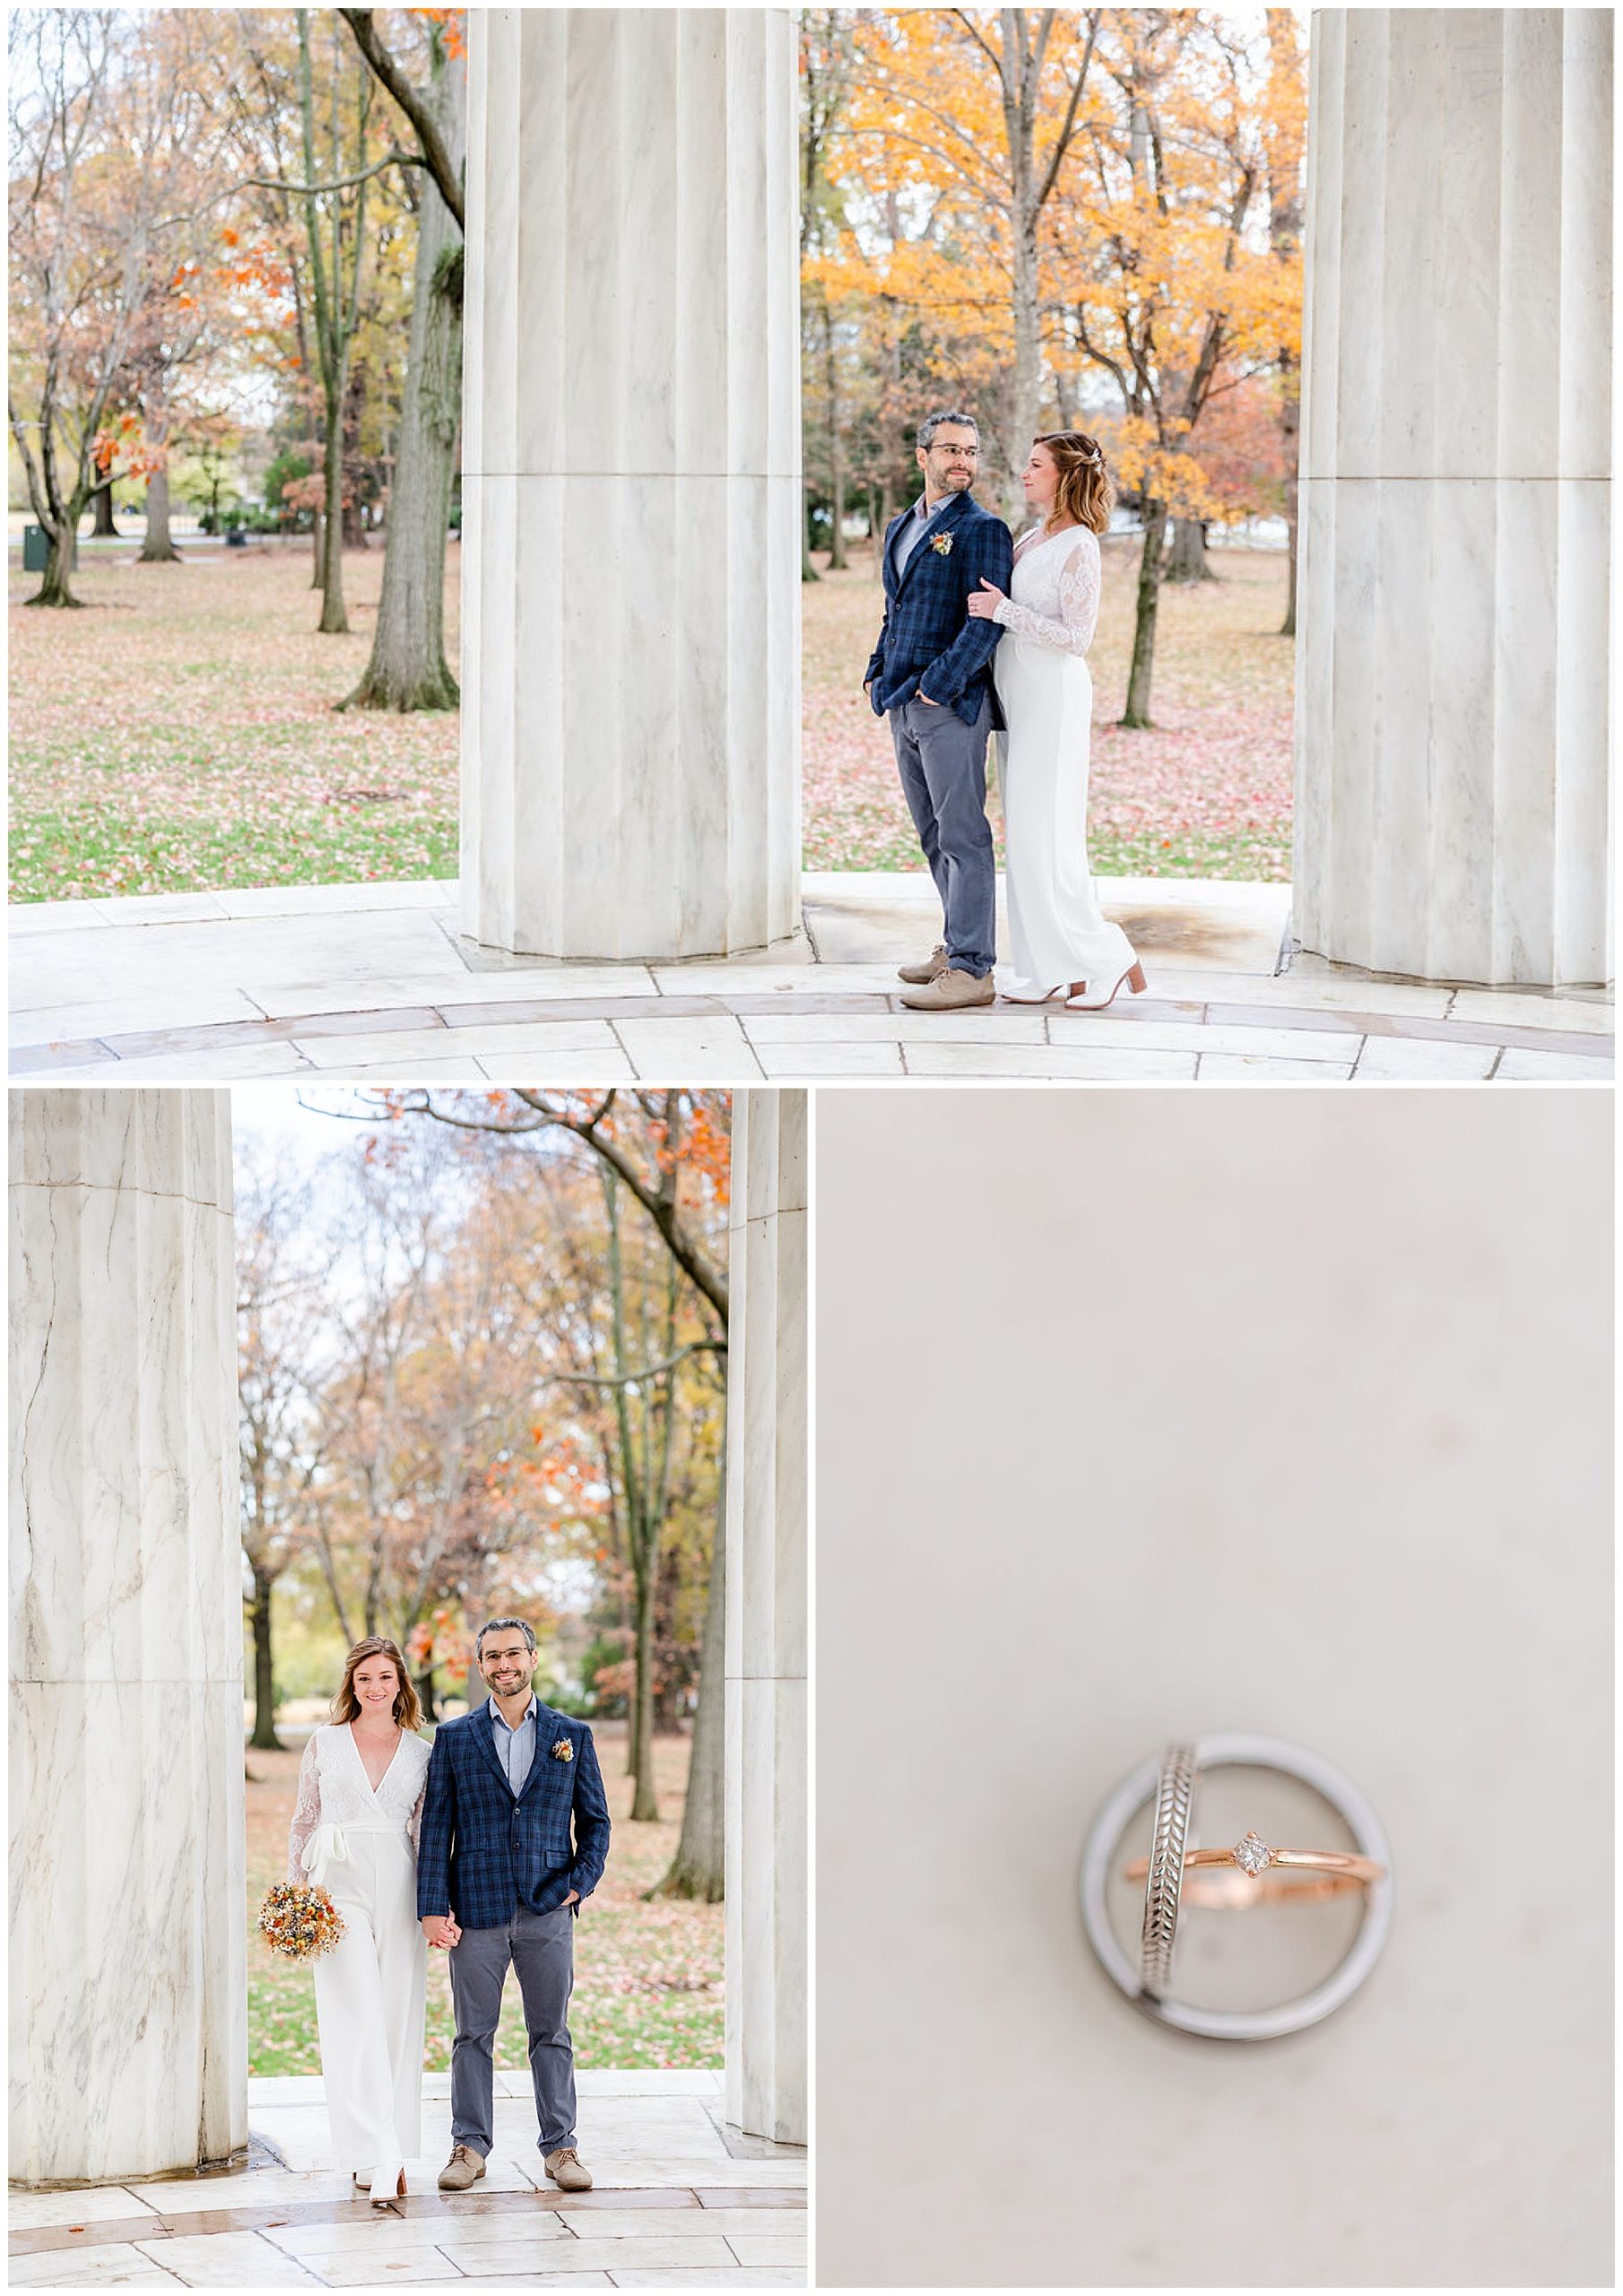 FDR Memorial elopement, DC War Memorial elopement, DC War Memorial photos, DC War Memorial wedding, DC portraits, tidal basin portraits, DC wedding photography, DC elopement photographer, cold weather elopement, Rachel E.H. Photography, woman standing behind man, rings stacked in sphere, couple holding hands, couple in between marble pillars, hair and makeup by Carla Pressley Hair and Makeup